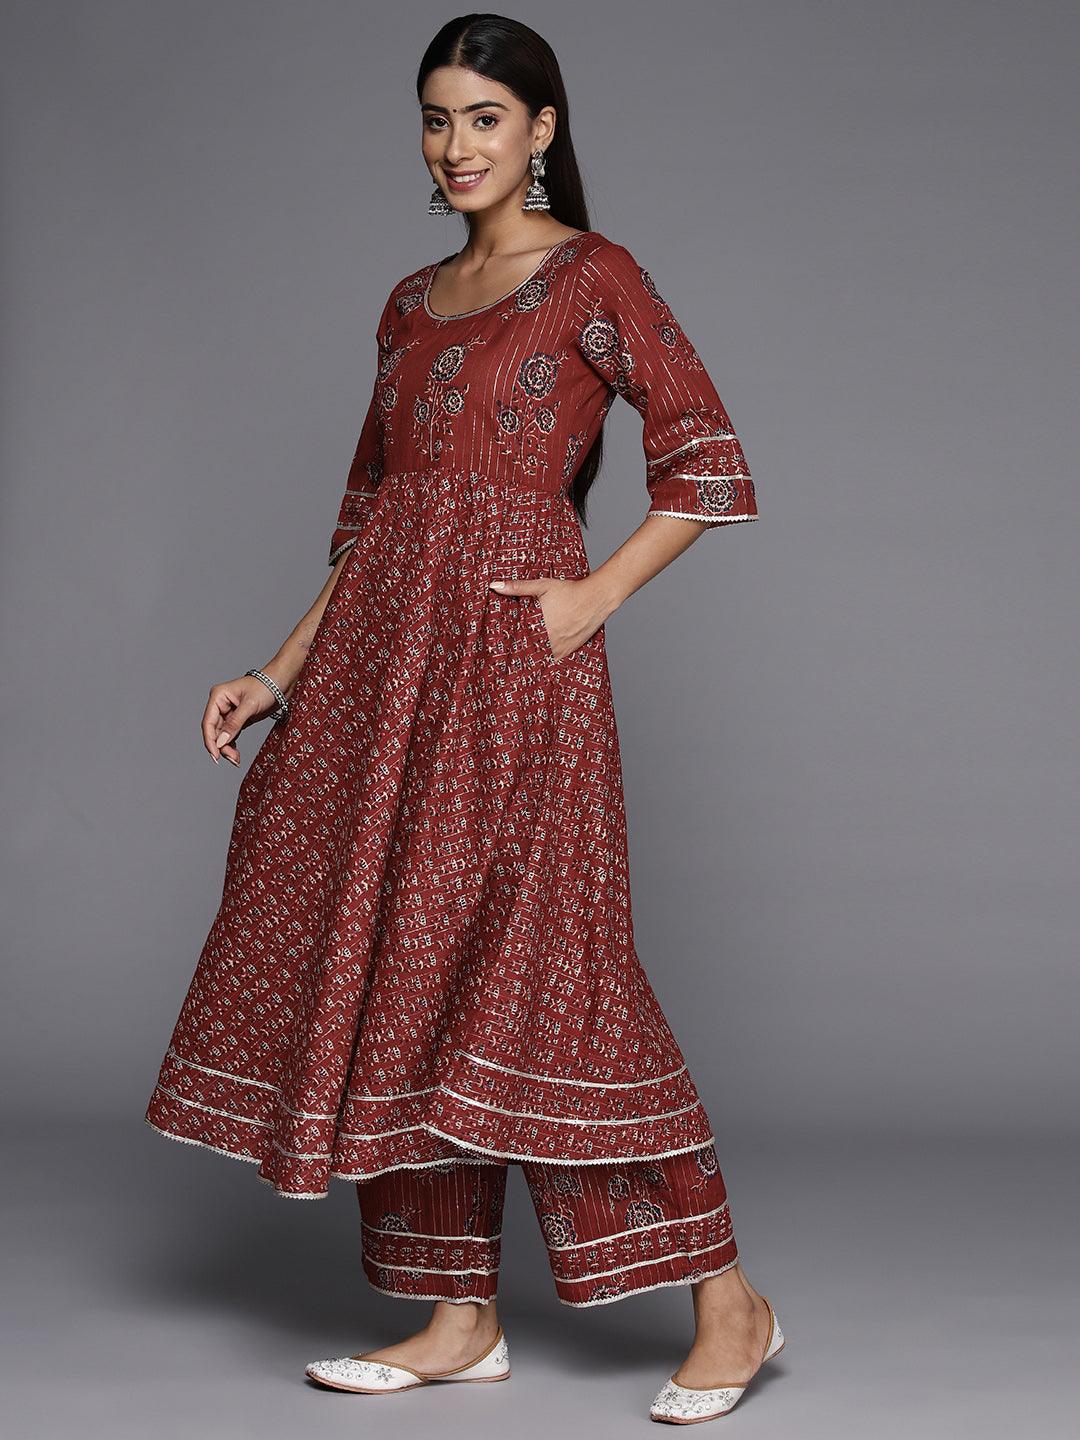 Maroon Printed Cotton Anarkali Suit With Dupatta